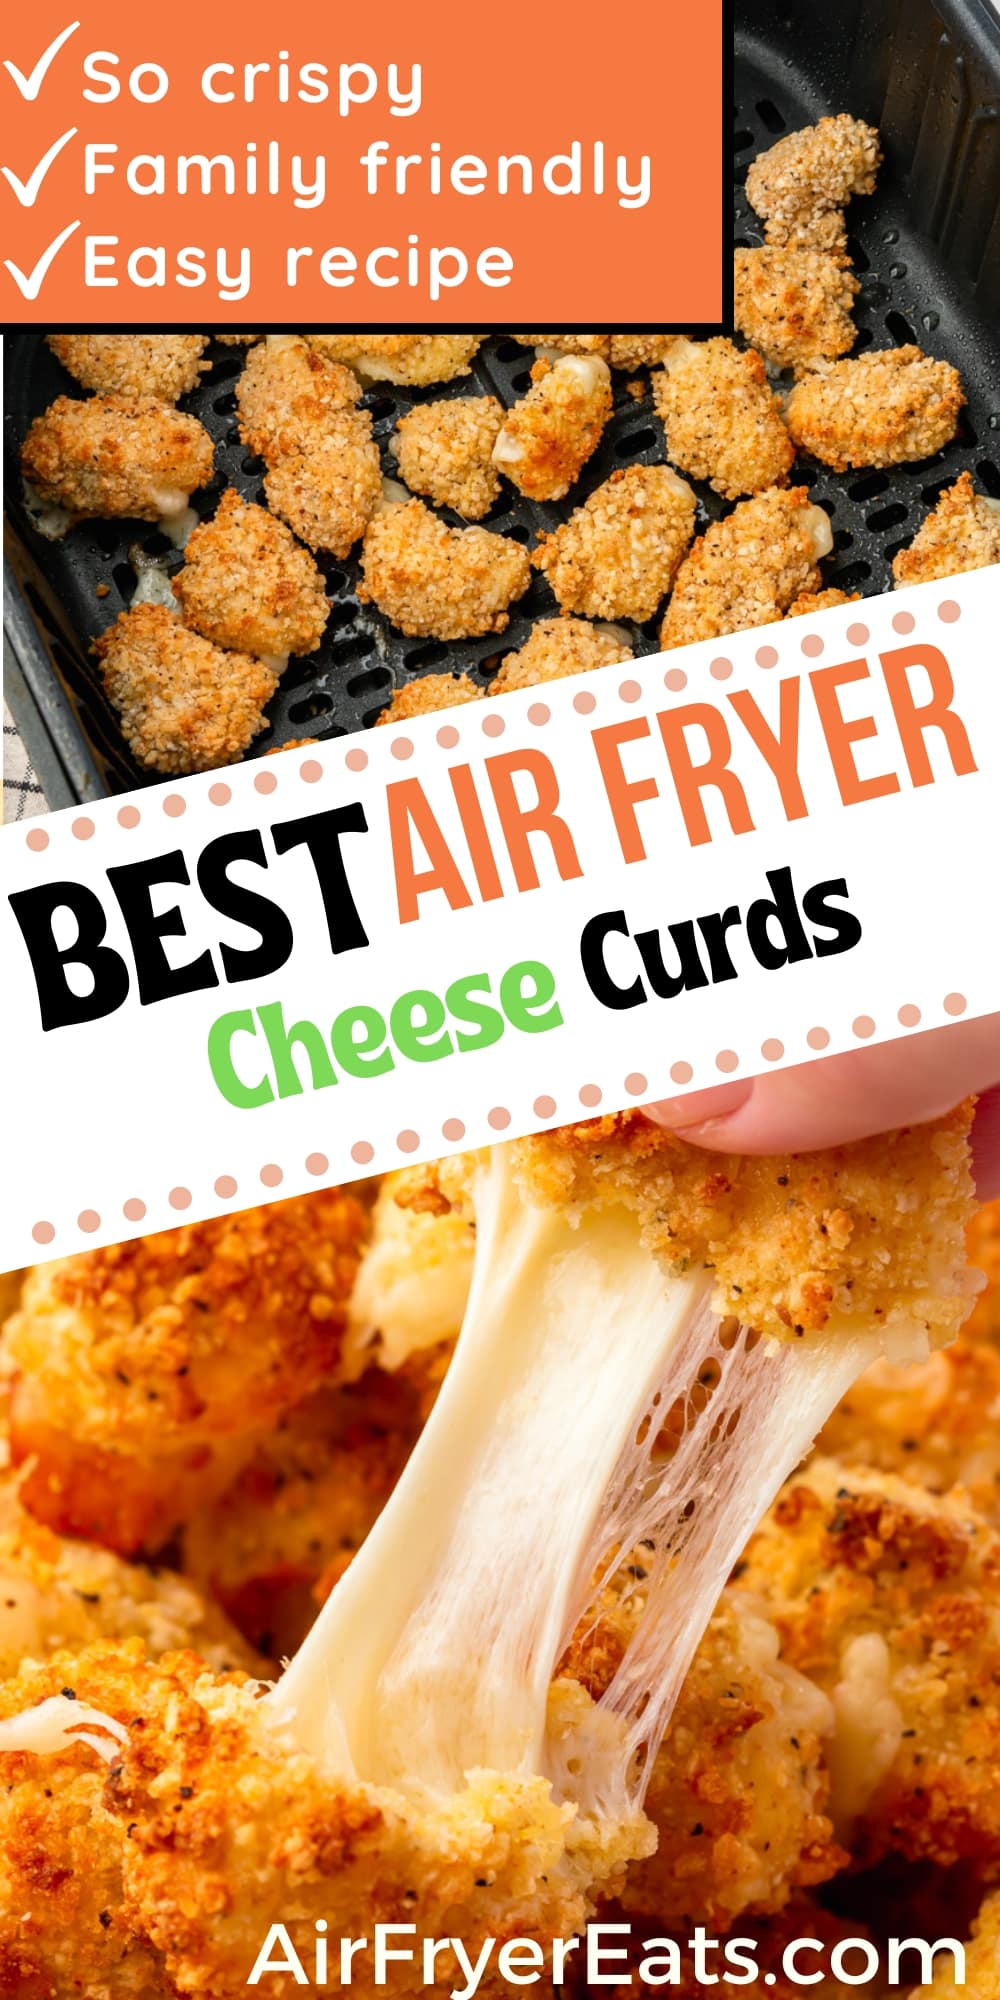 two photos of fried cheese curds. text overlay says "best air fryer cheese curds" via @vegetarianmamma